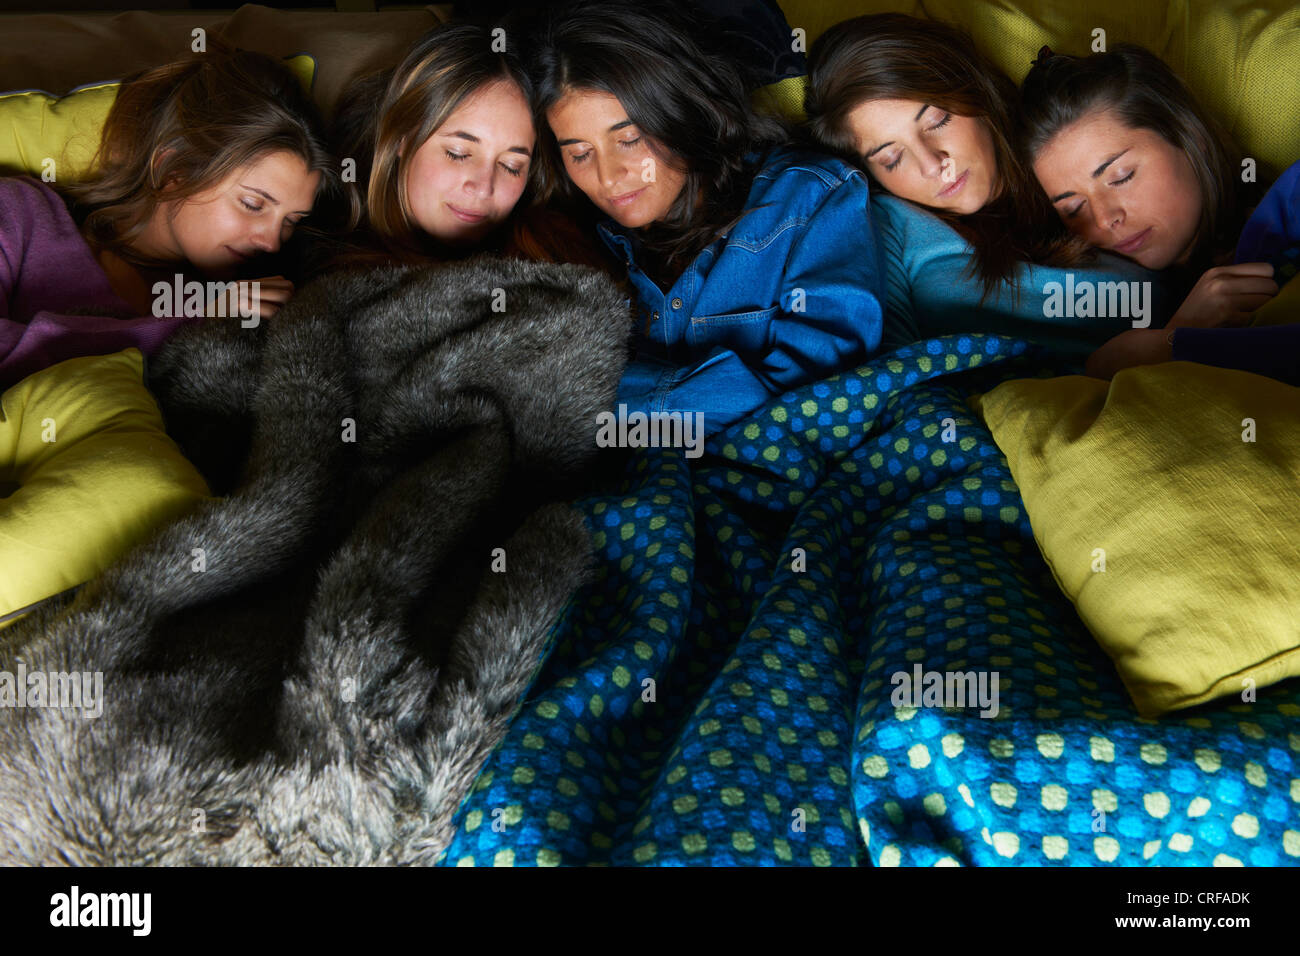 Women sleeping in bed together Stock Photo